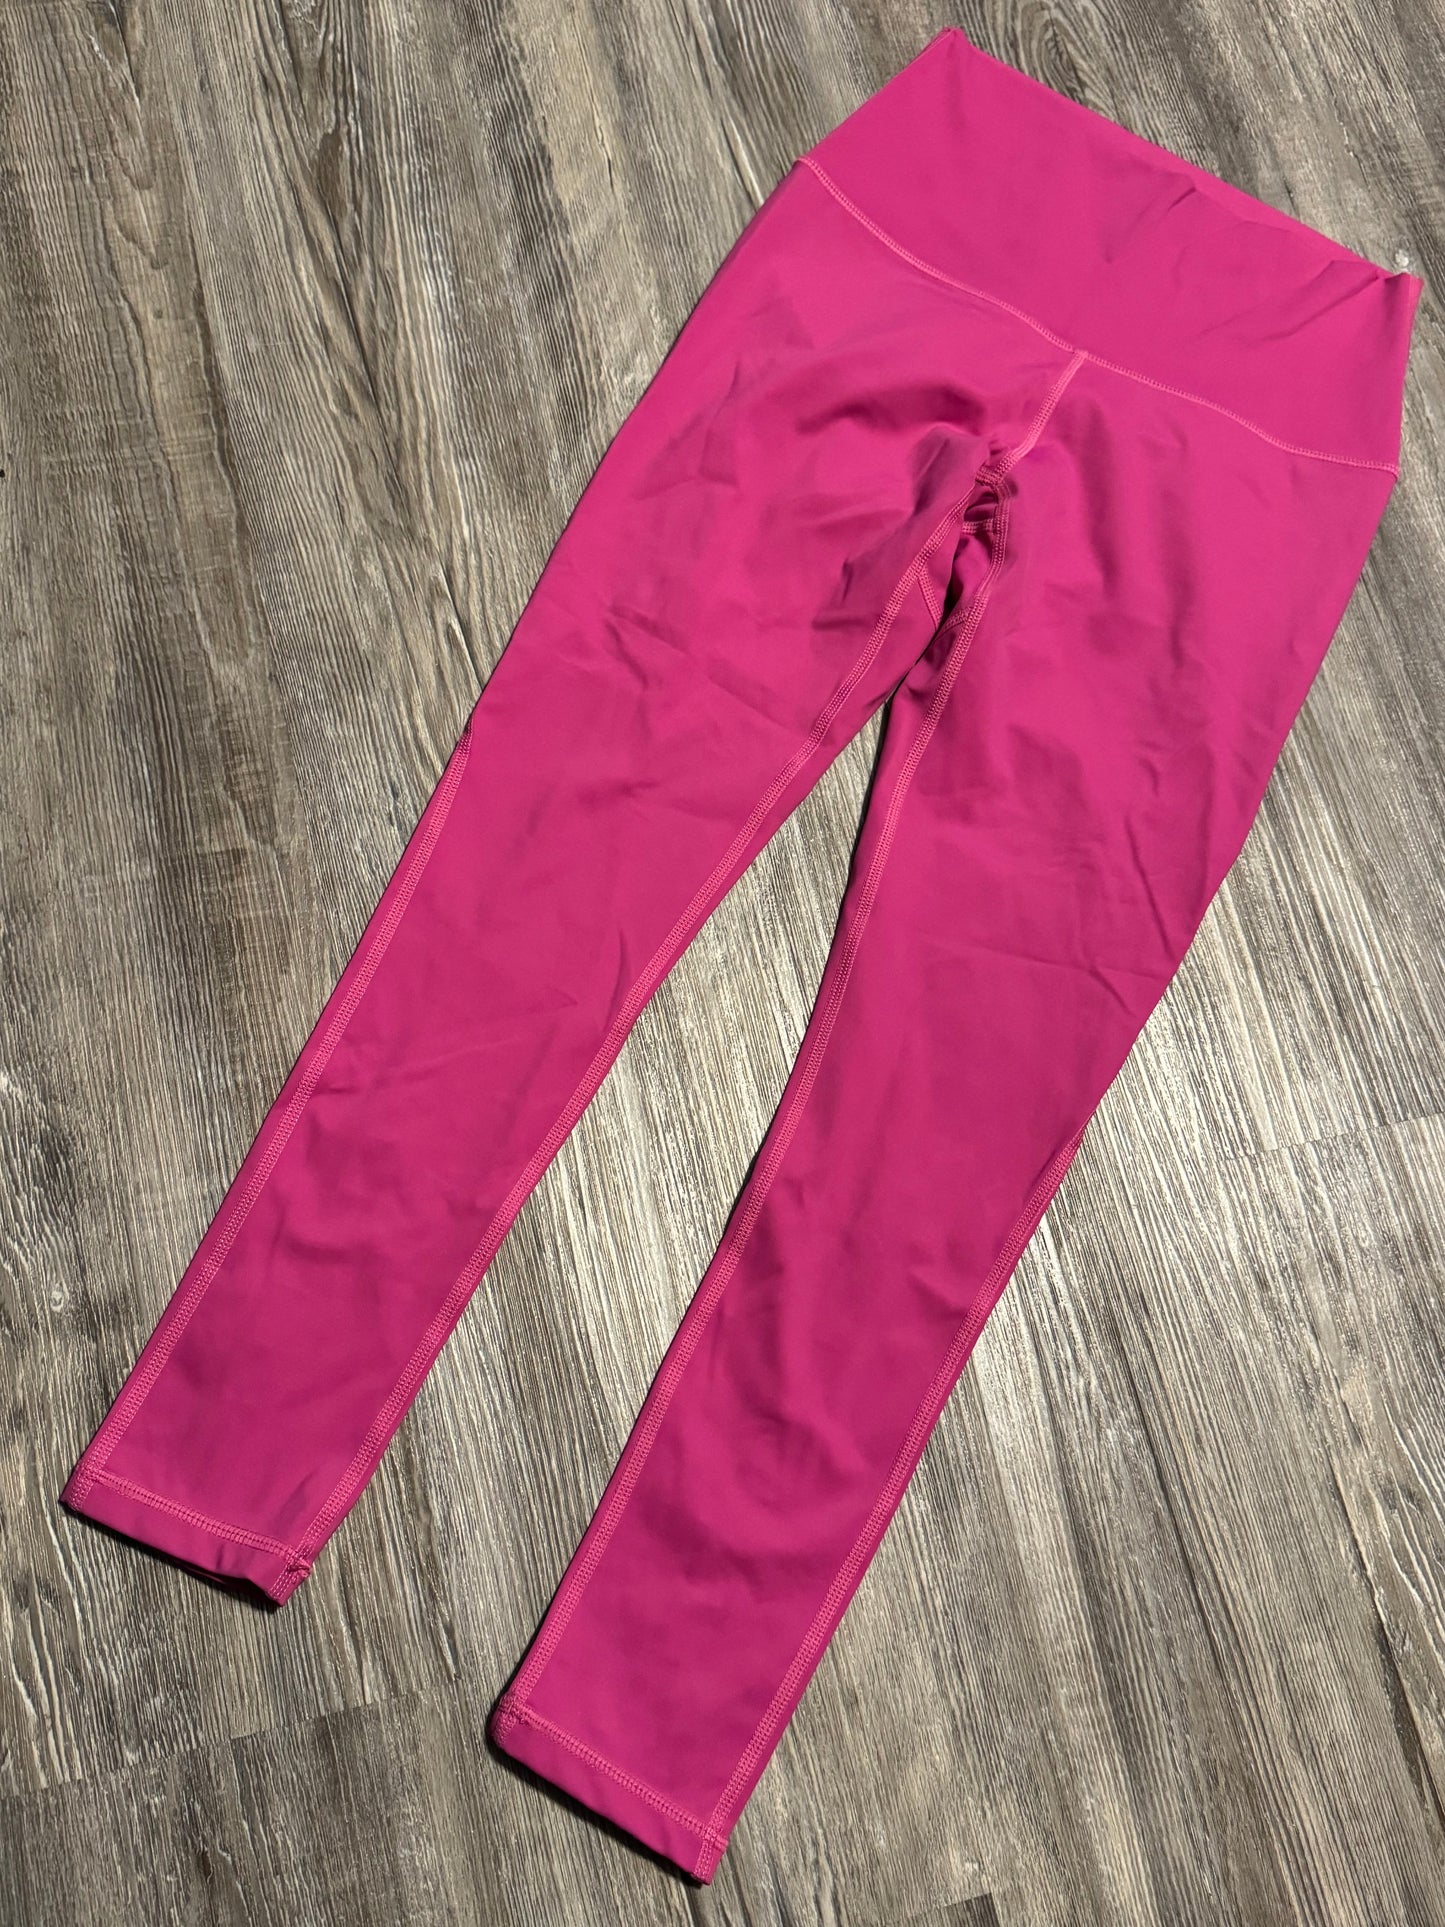 Athletic Leggings By Zyia  Size: 6